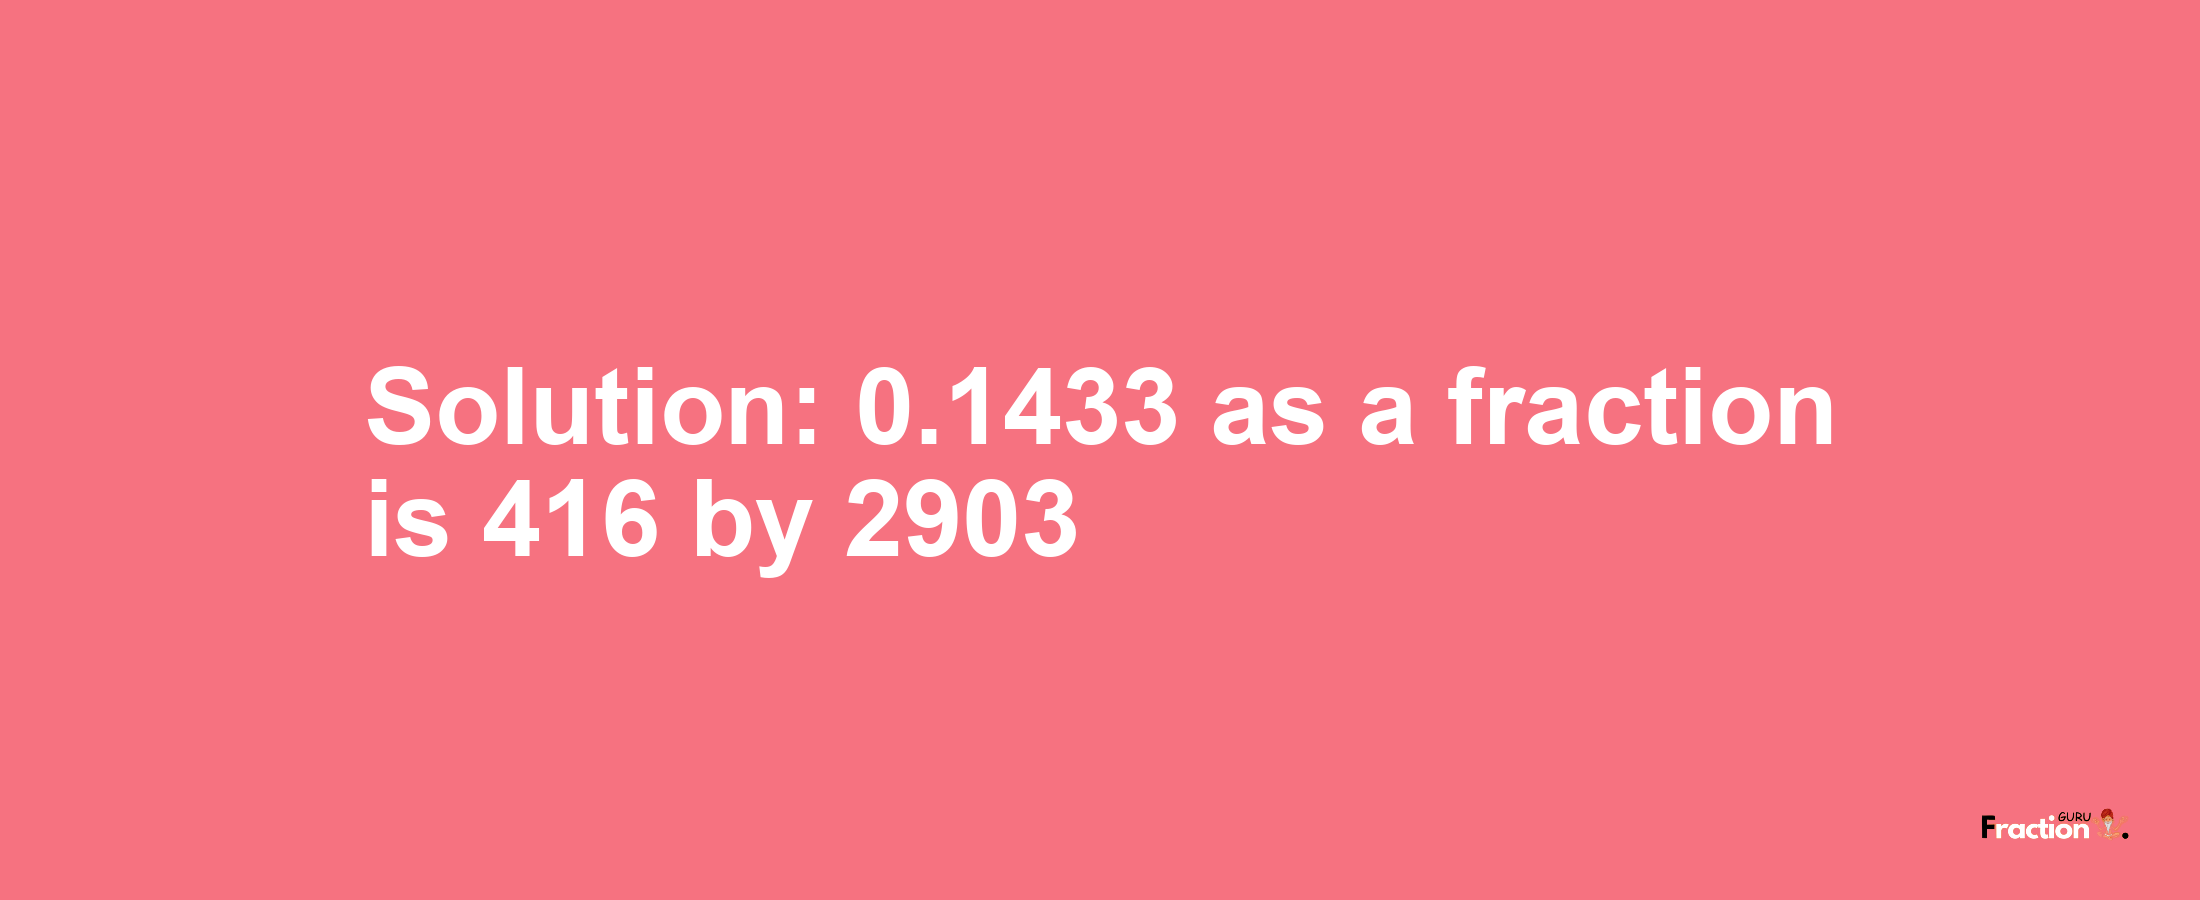 Solution:0.1433 as a fraction is 416/2903